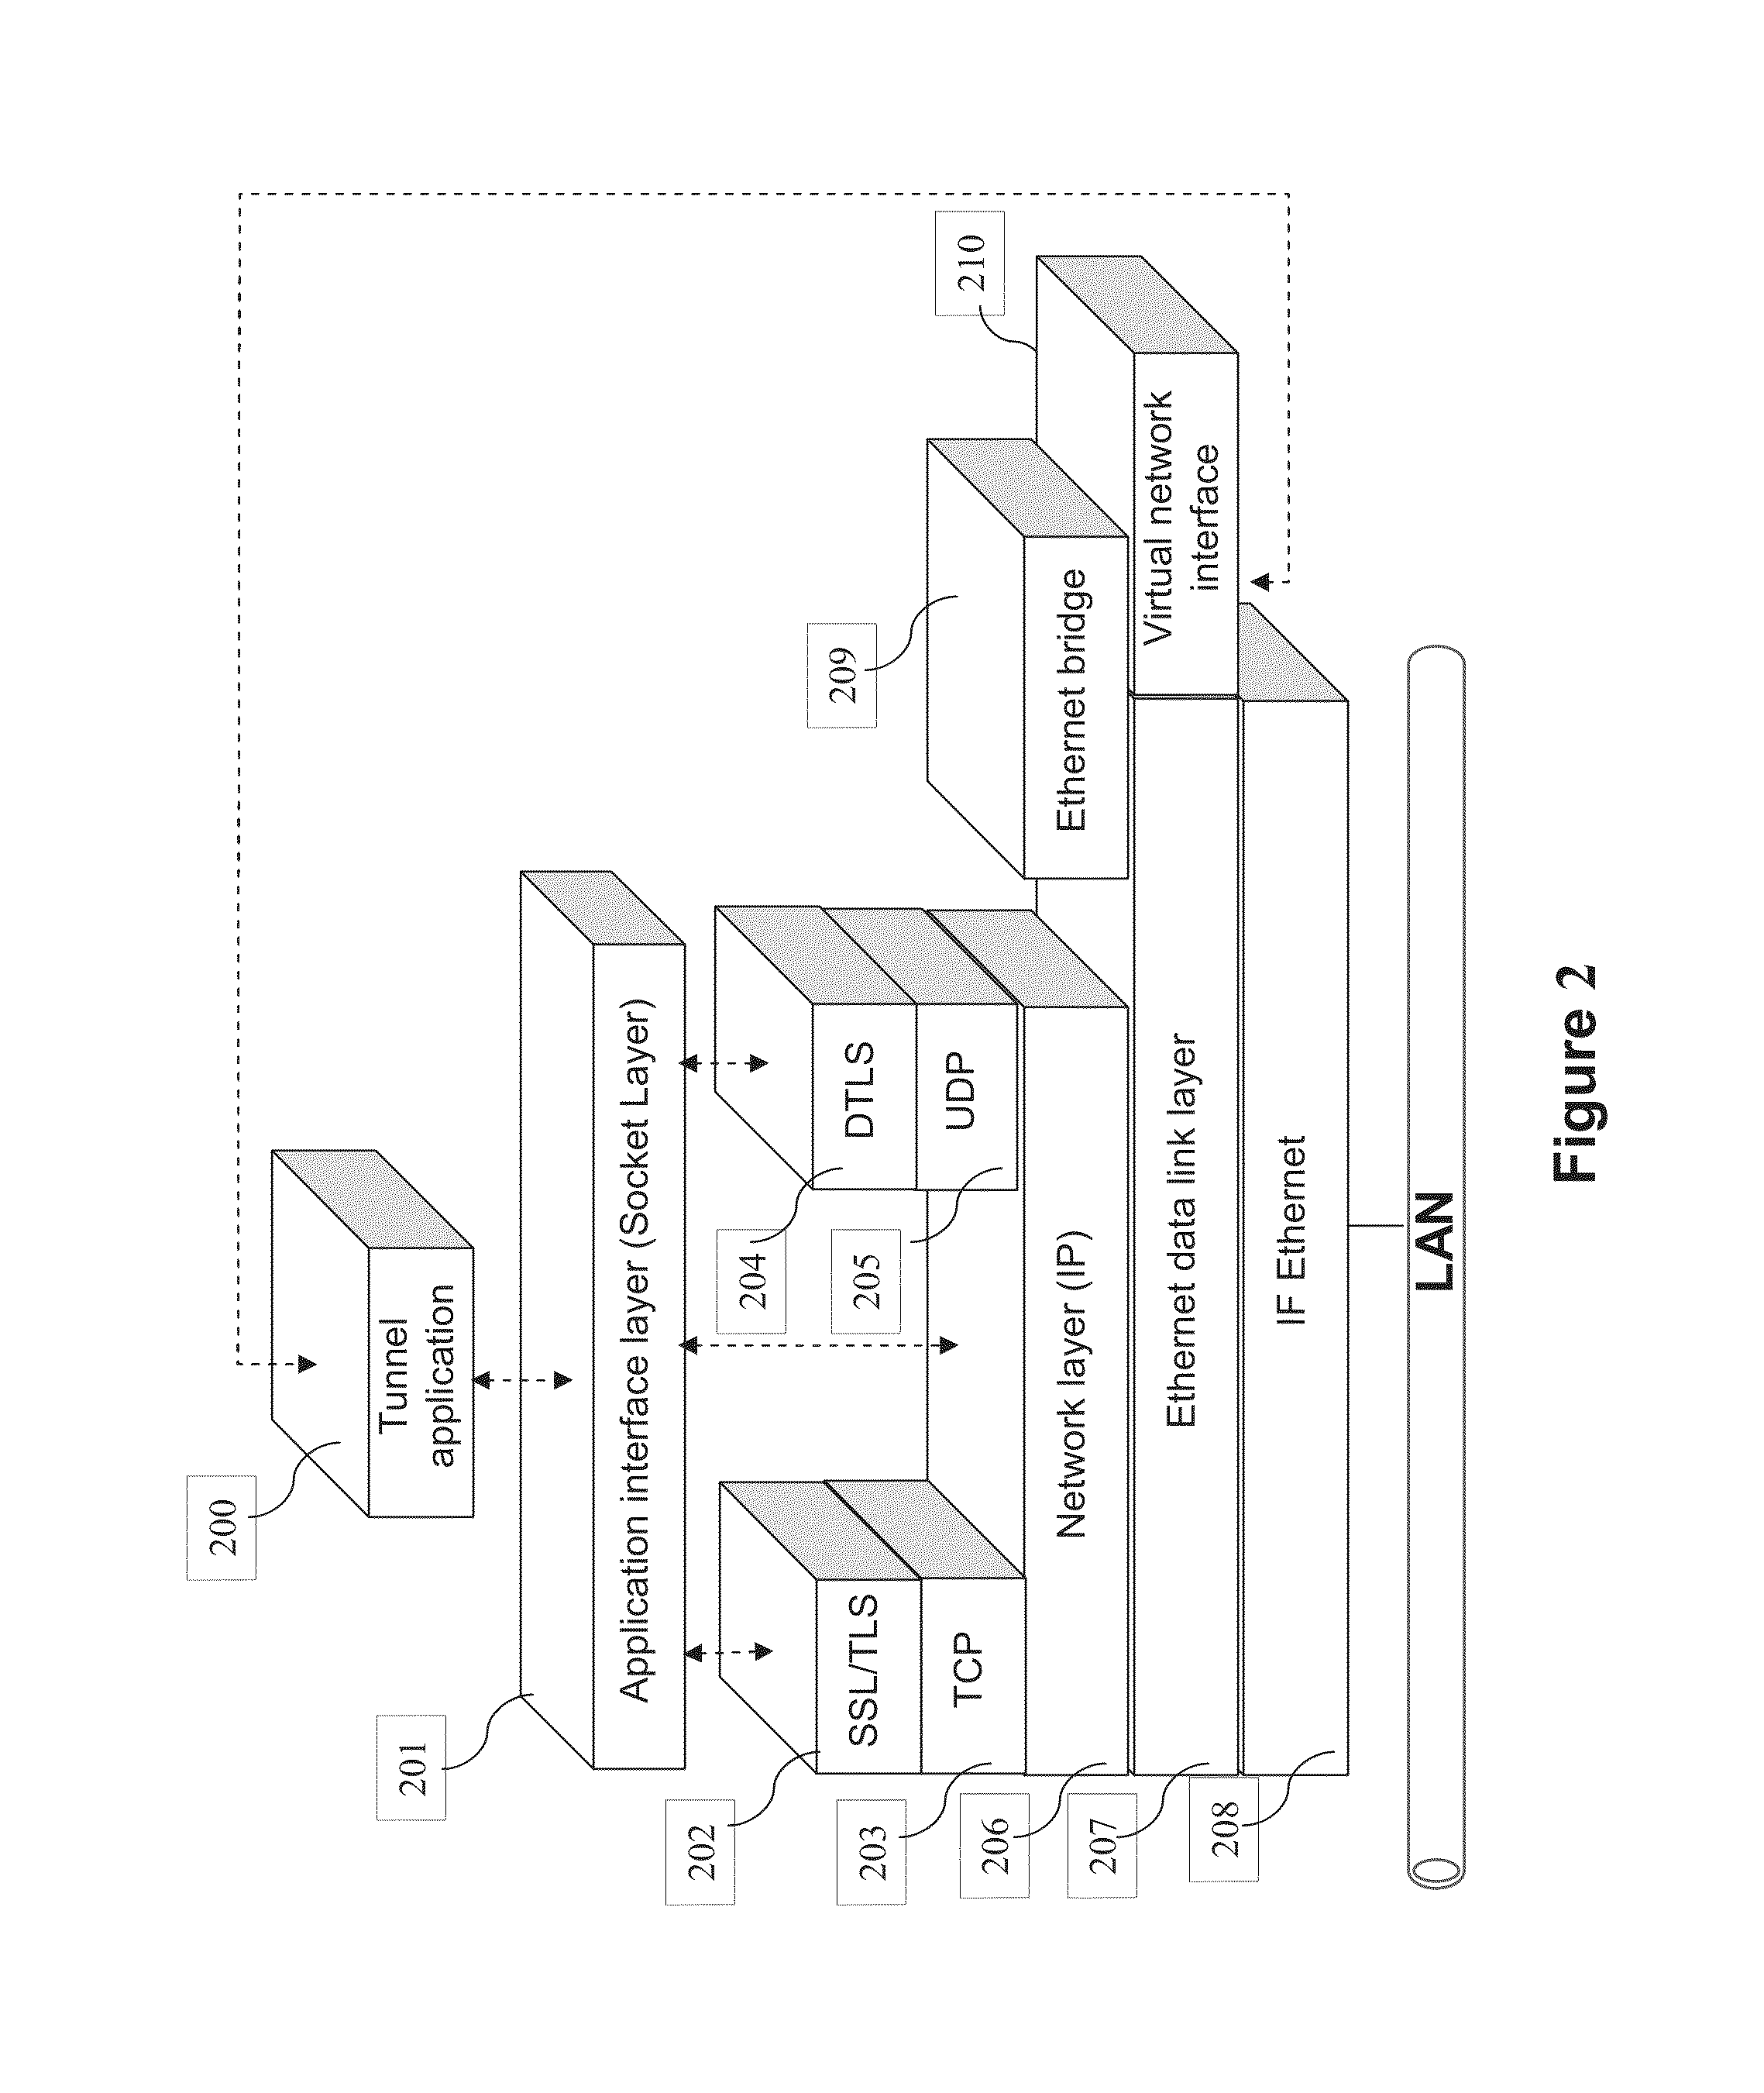 Methods and devices for transmitting a data stream and corresponding computer readable media